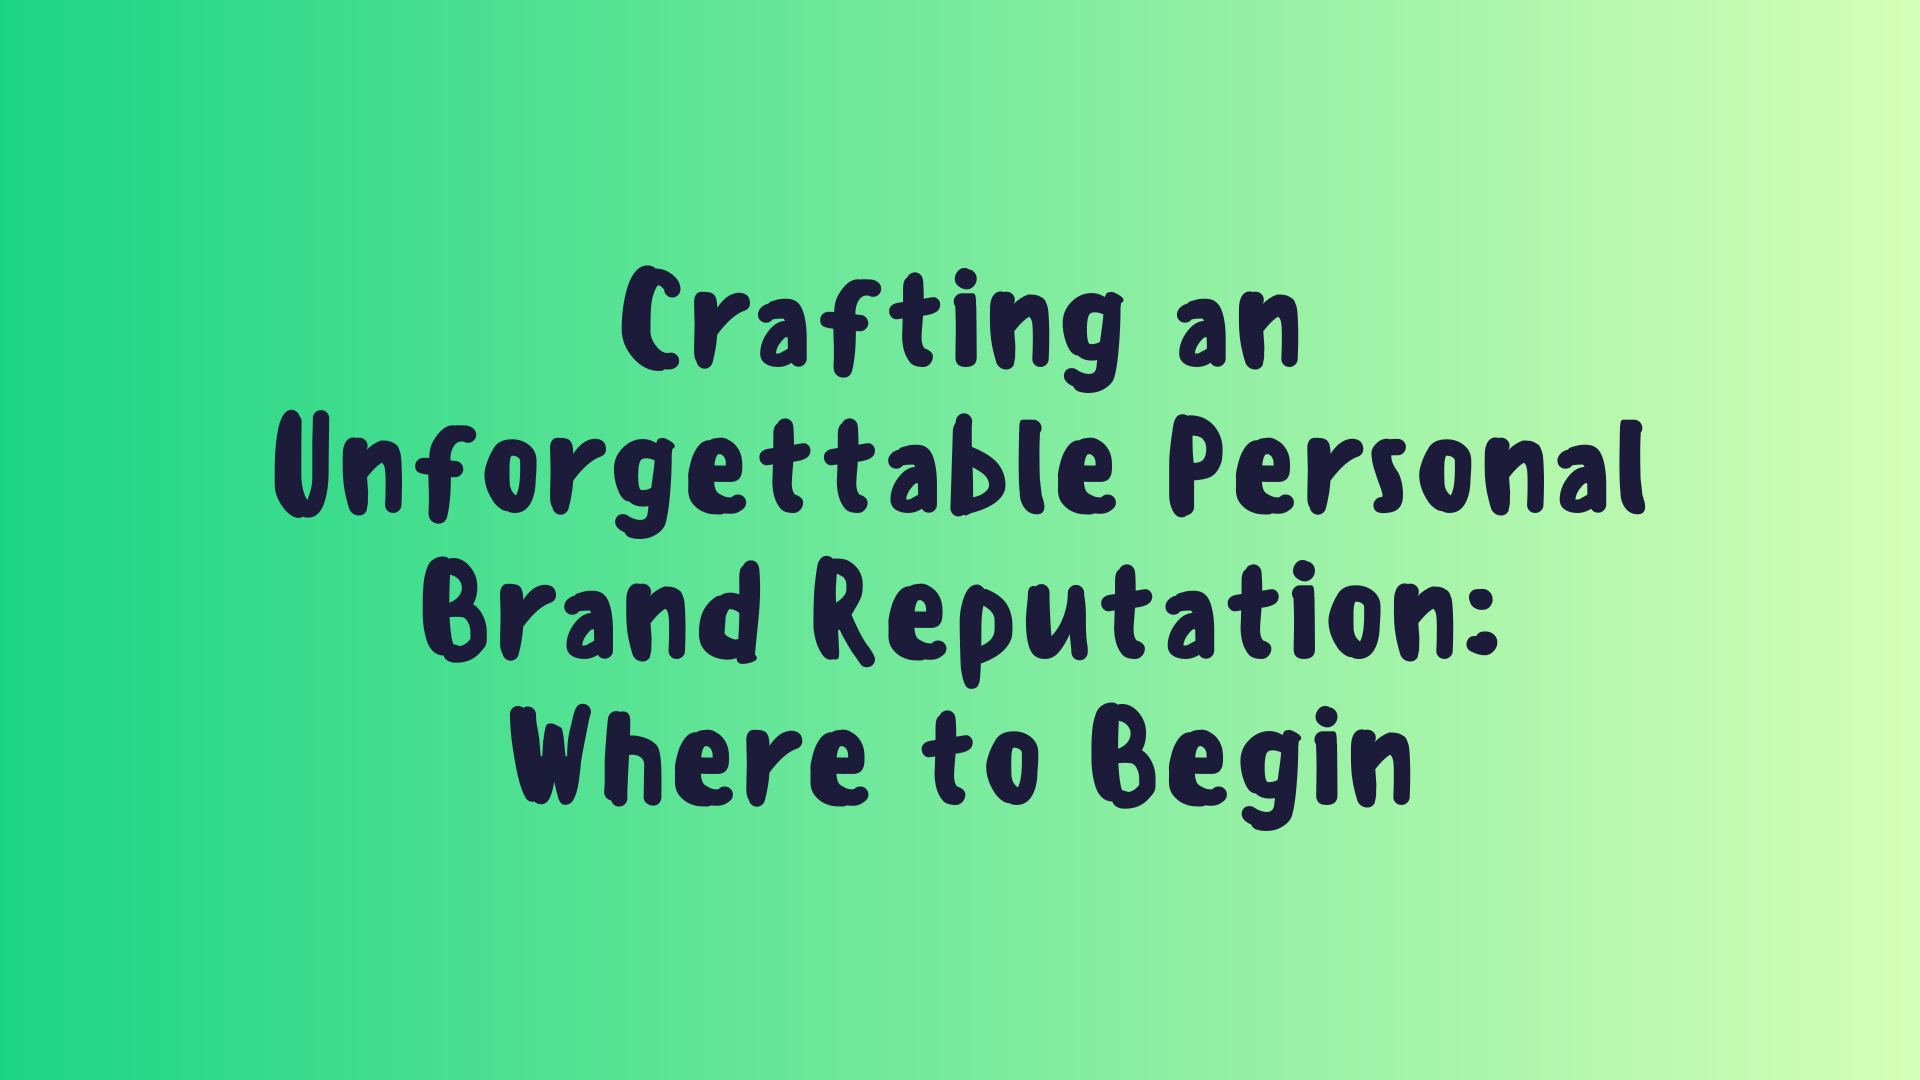 Crafting an Unforgettable Personal Brand Reputation: Where to Begin